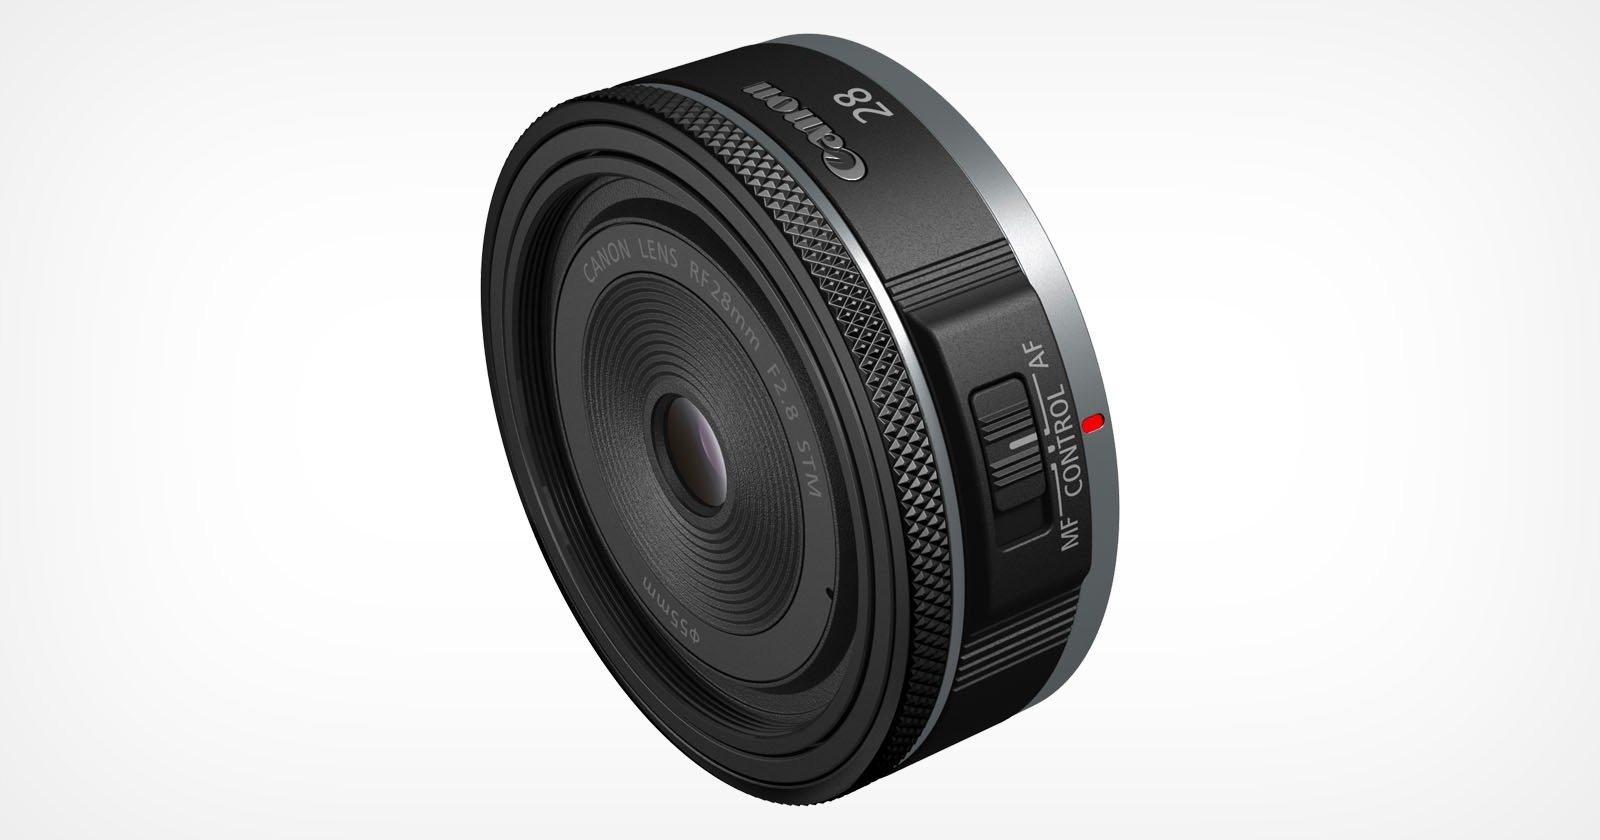 Canon RF 28mm f/2.8 STM Lens (Canon RF) by Canon at B&C Camera